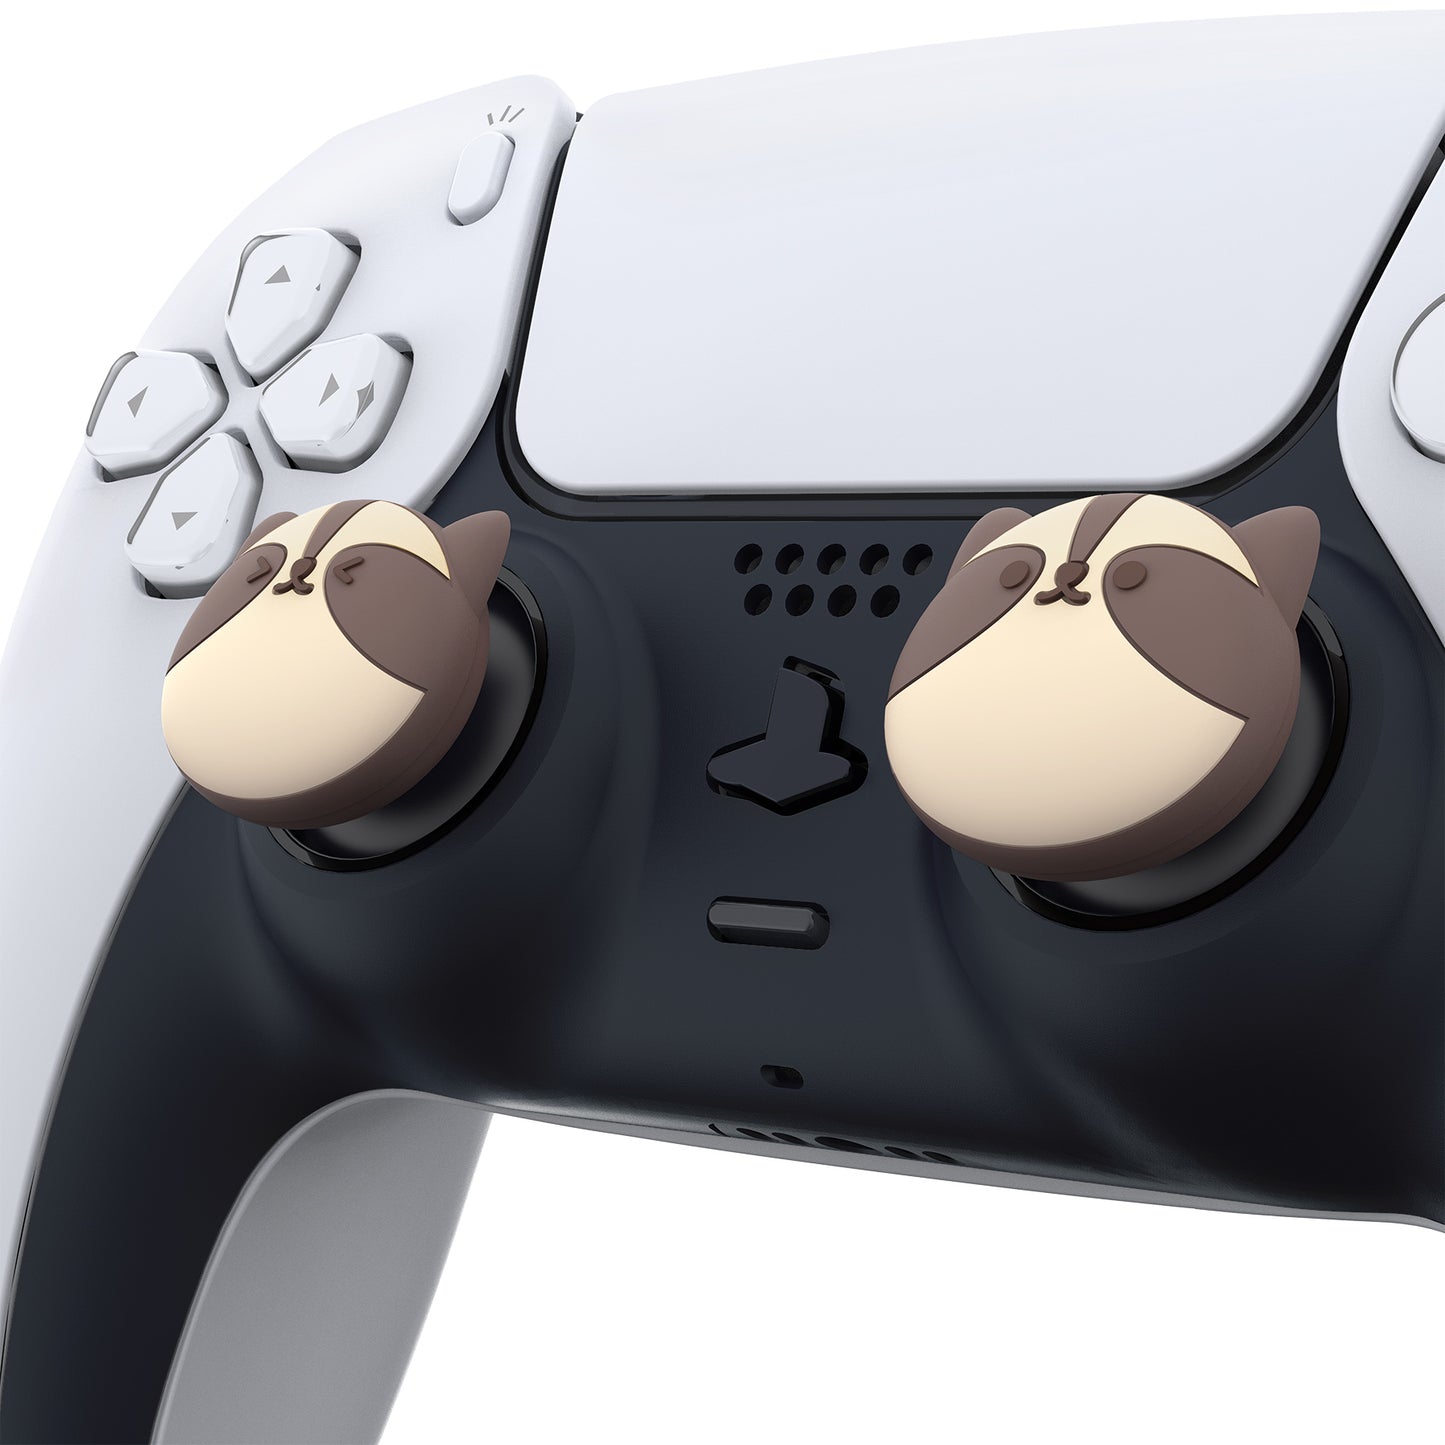 PlayVital Cute Thumb Grip Caps for ps5/4 Controller, Silicone Analog Stick Caps Cover for Xbox Series X/S, Thumbstick Caps for Switch Pro Controller - Little Raccoon - PJM3013 PlayVital